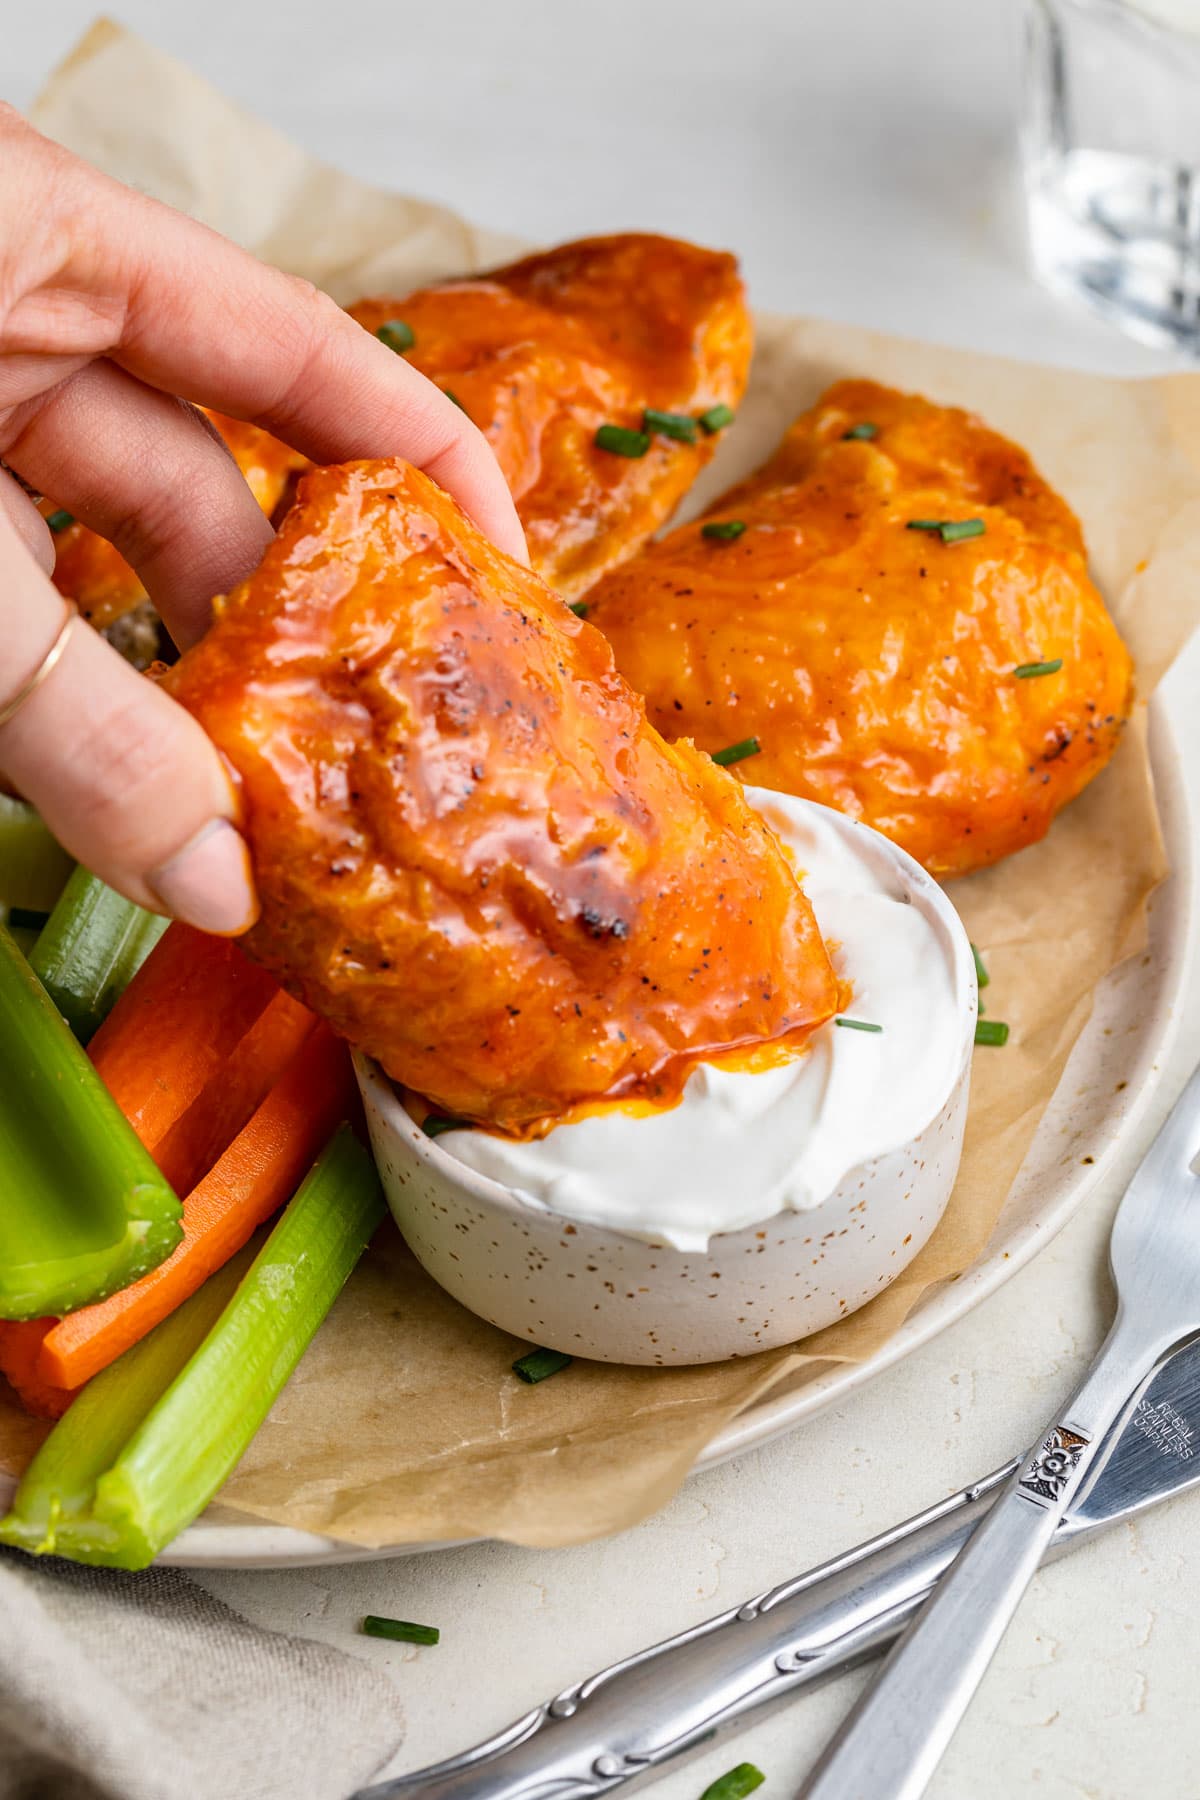 A buffalo sauced chicken thigh being dipped into a bowl of blue cheese dressing.